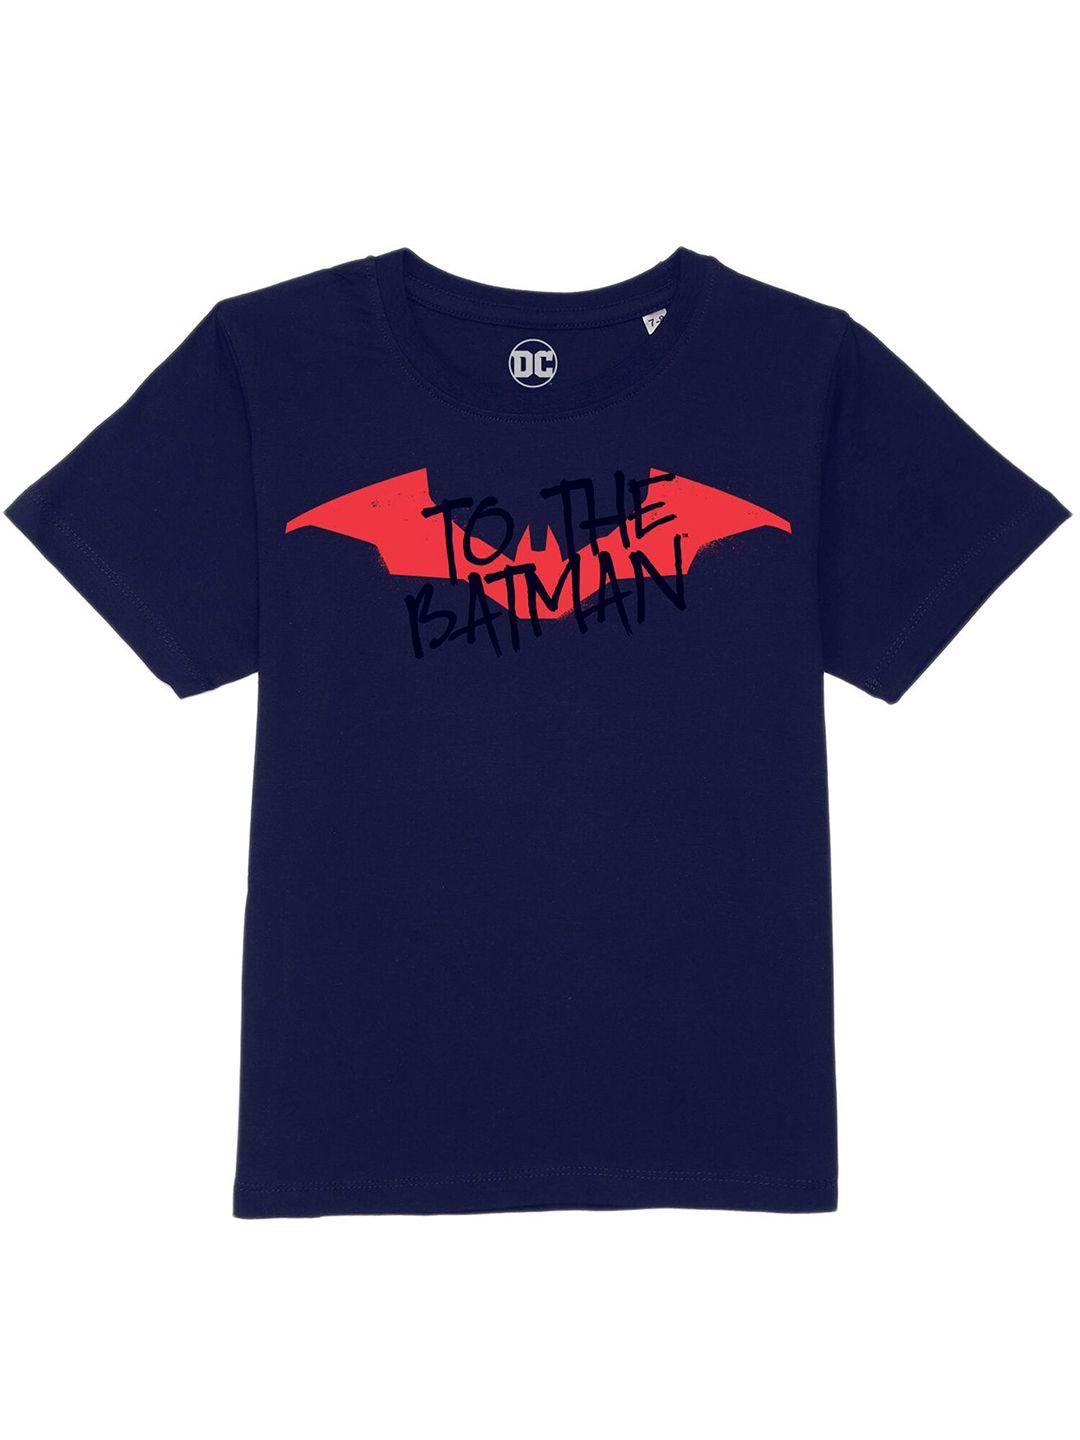 dc-by-wear-your-mind-boys-navy-blue-graphic-printed-cotton-t-shirt